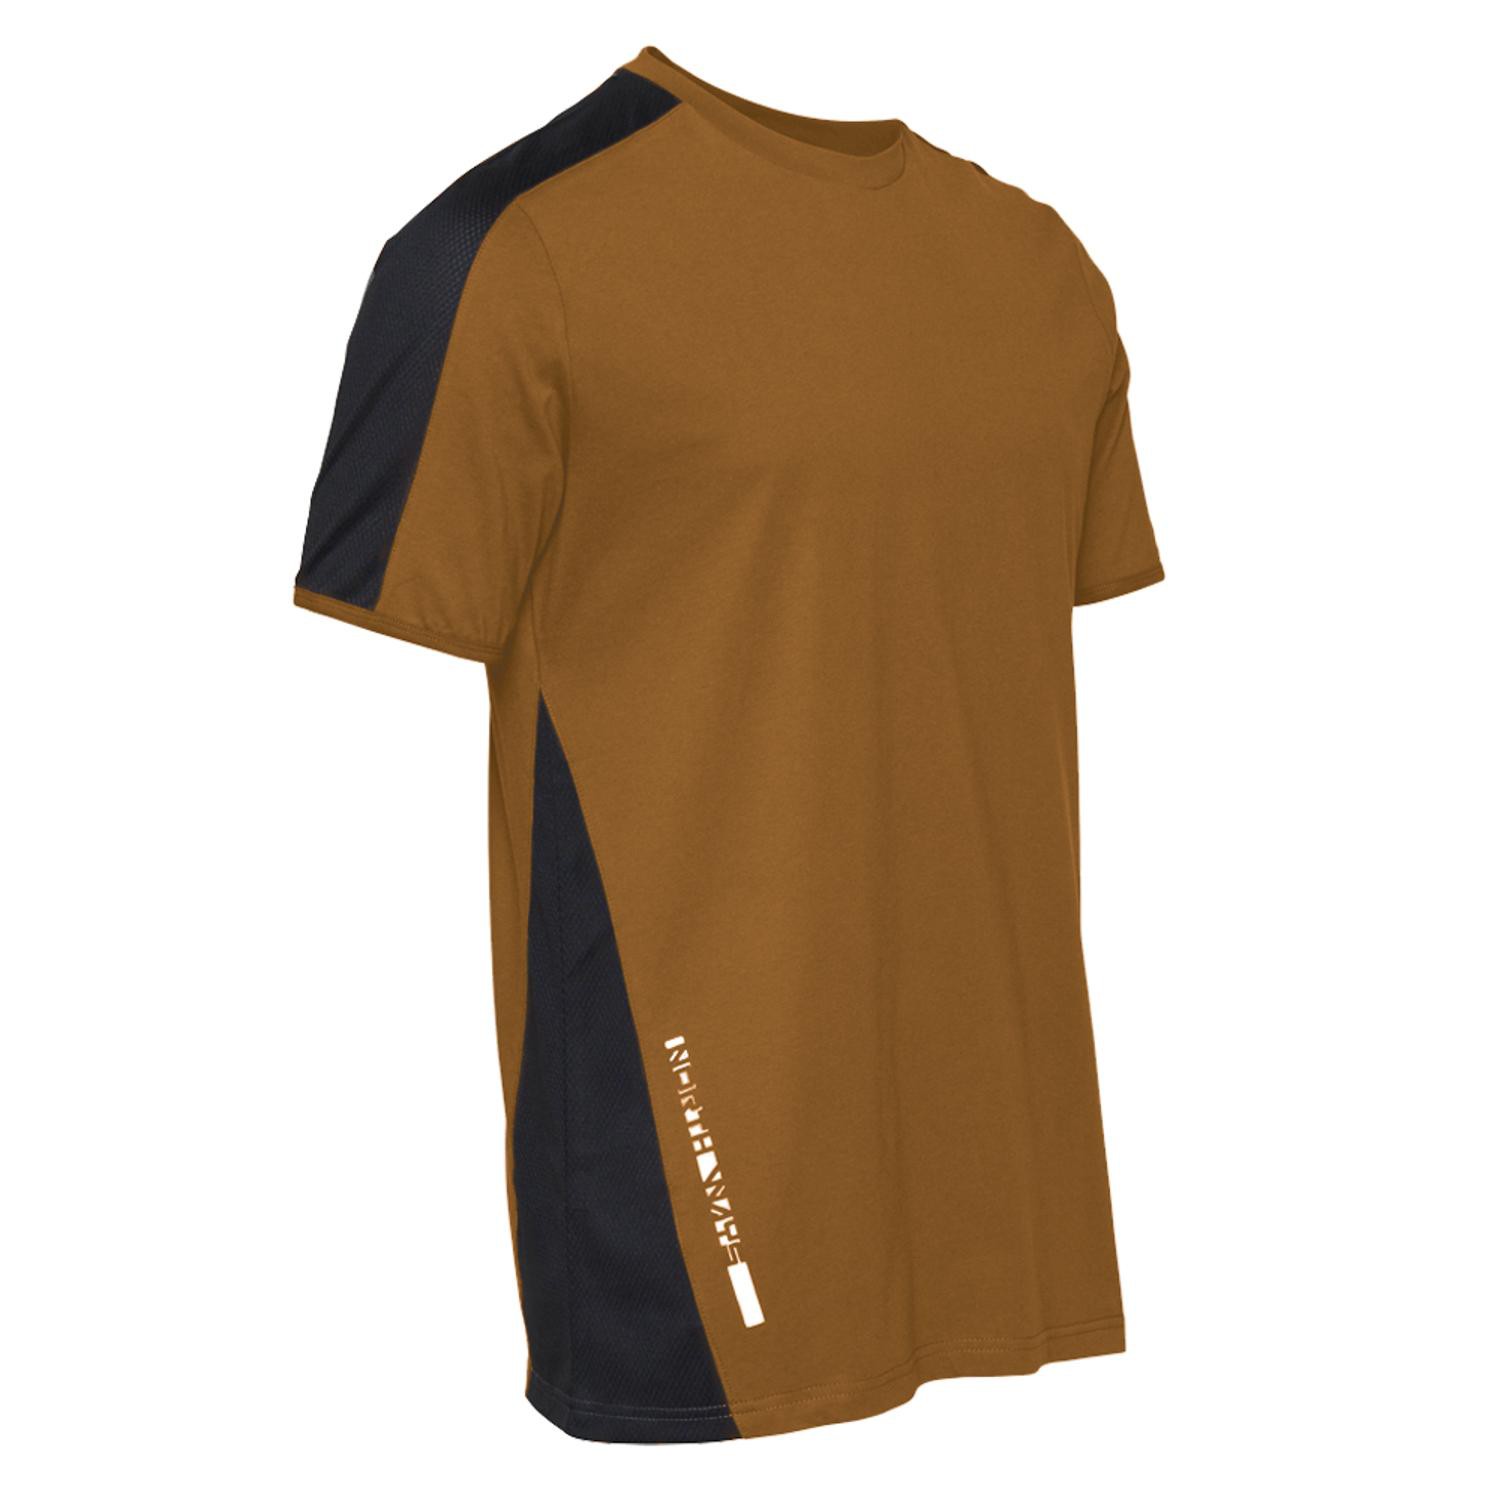 Tee shirt manches courtes contraste Andy North Ways marron vue 1 cotepro.fr